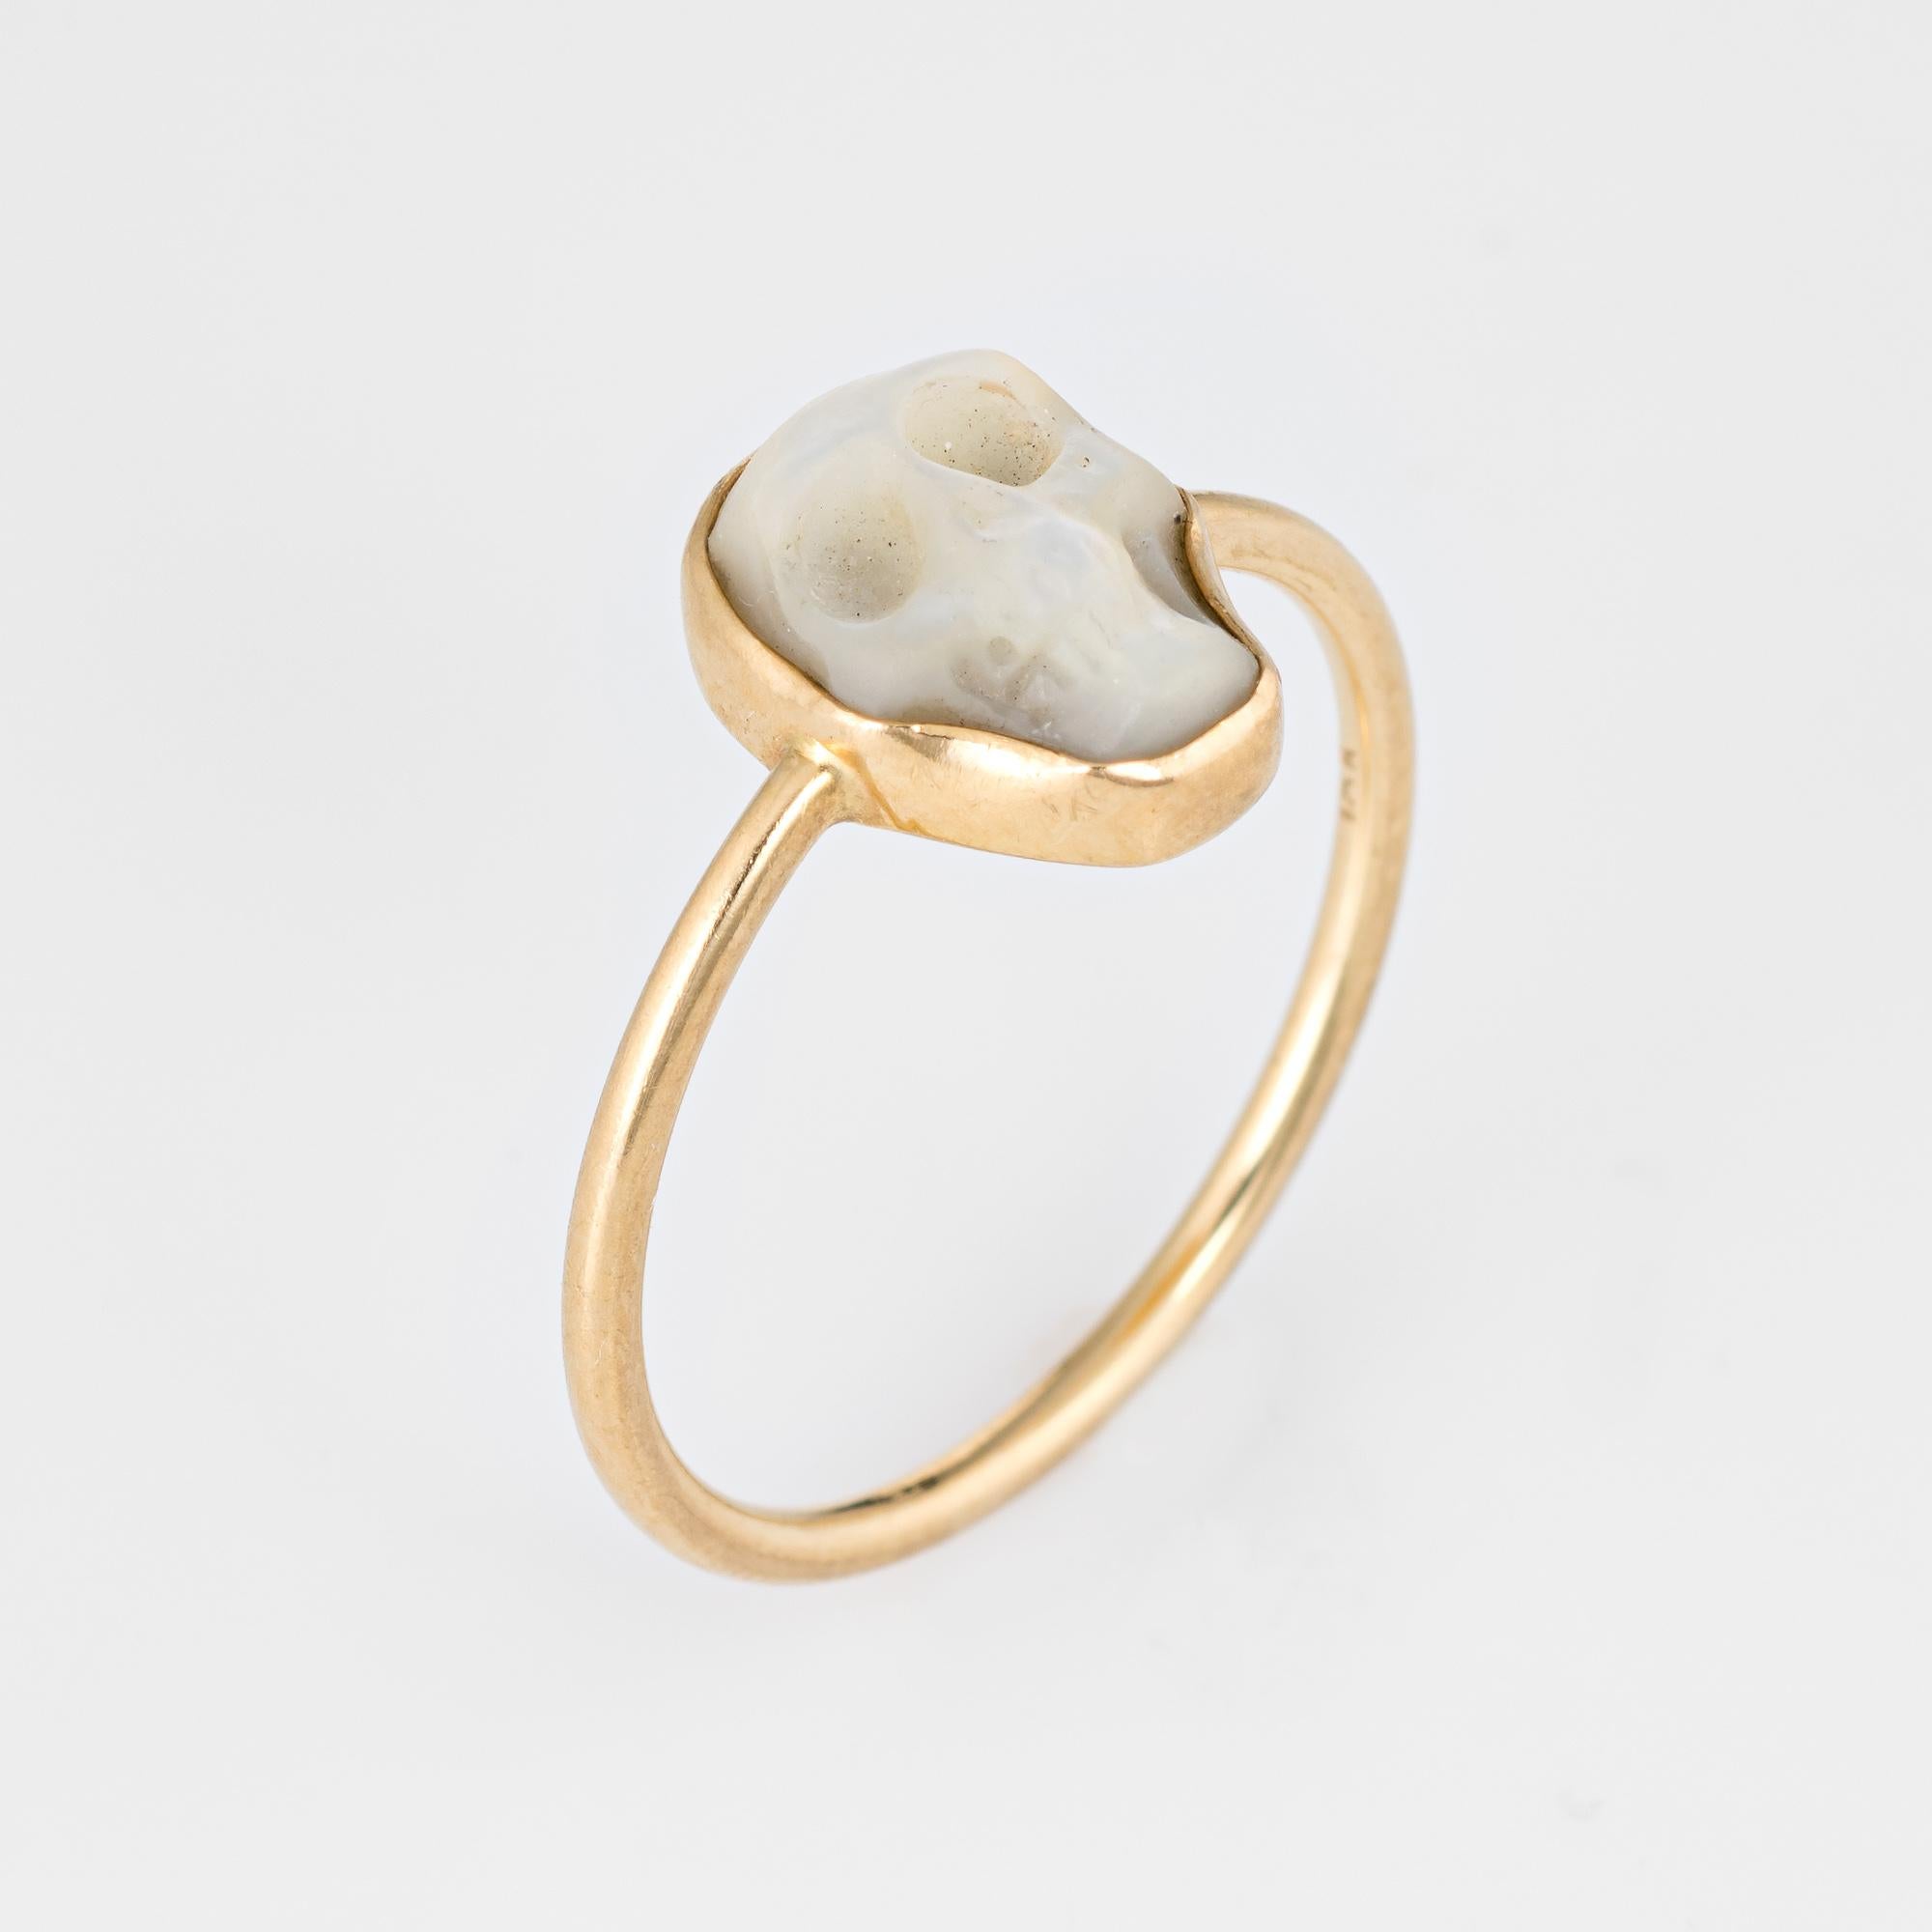 Stylish mother of pearl skull ring crafted in 18 karat yellow gold. 

Mother of pearl is carved in the form of a skull (measuring 10mm x 6mm). The mother of pearl is in excellent condition and free of cracks or chips. 

Luminous mother of pearl